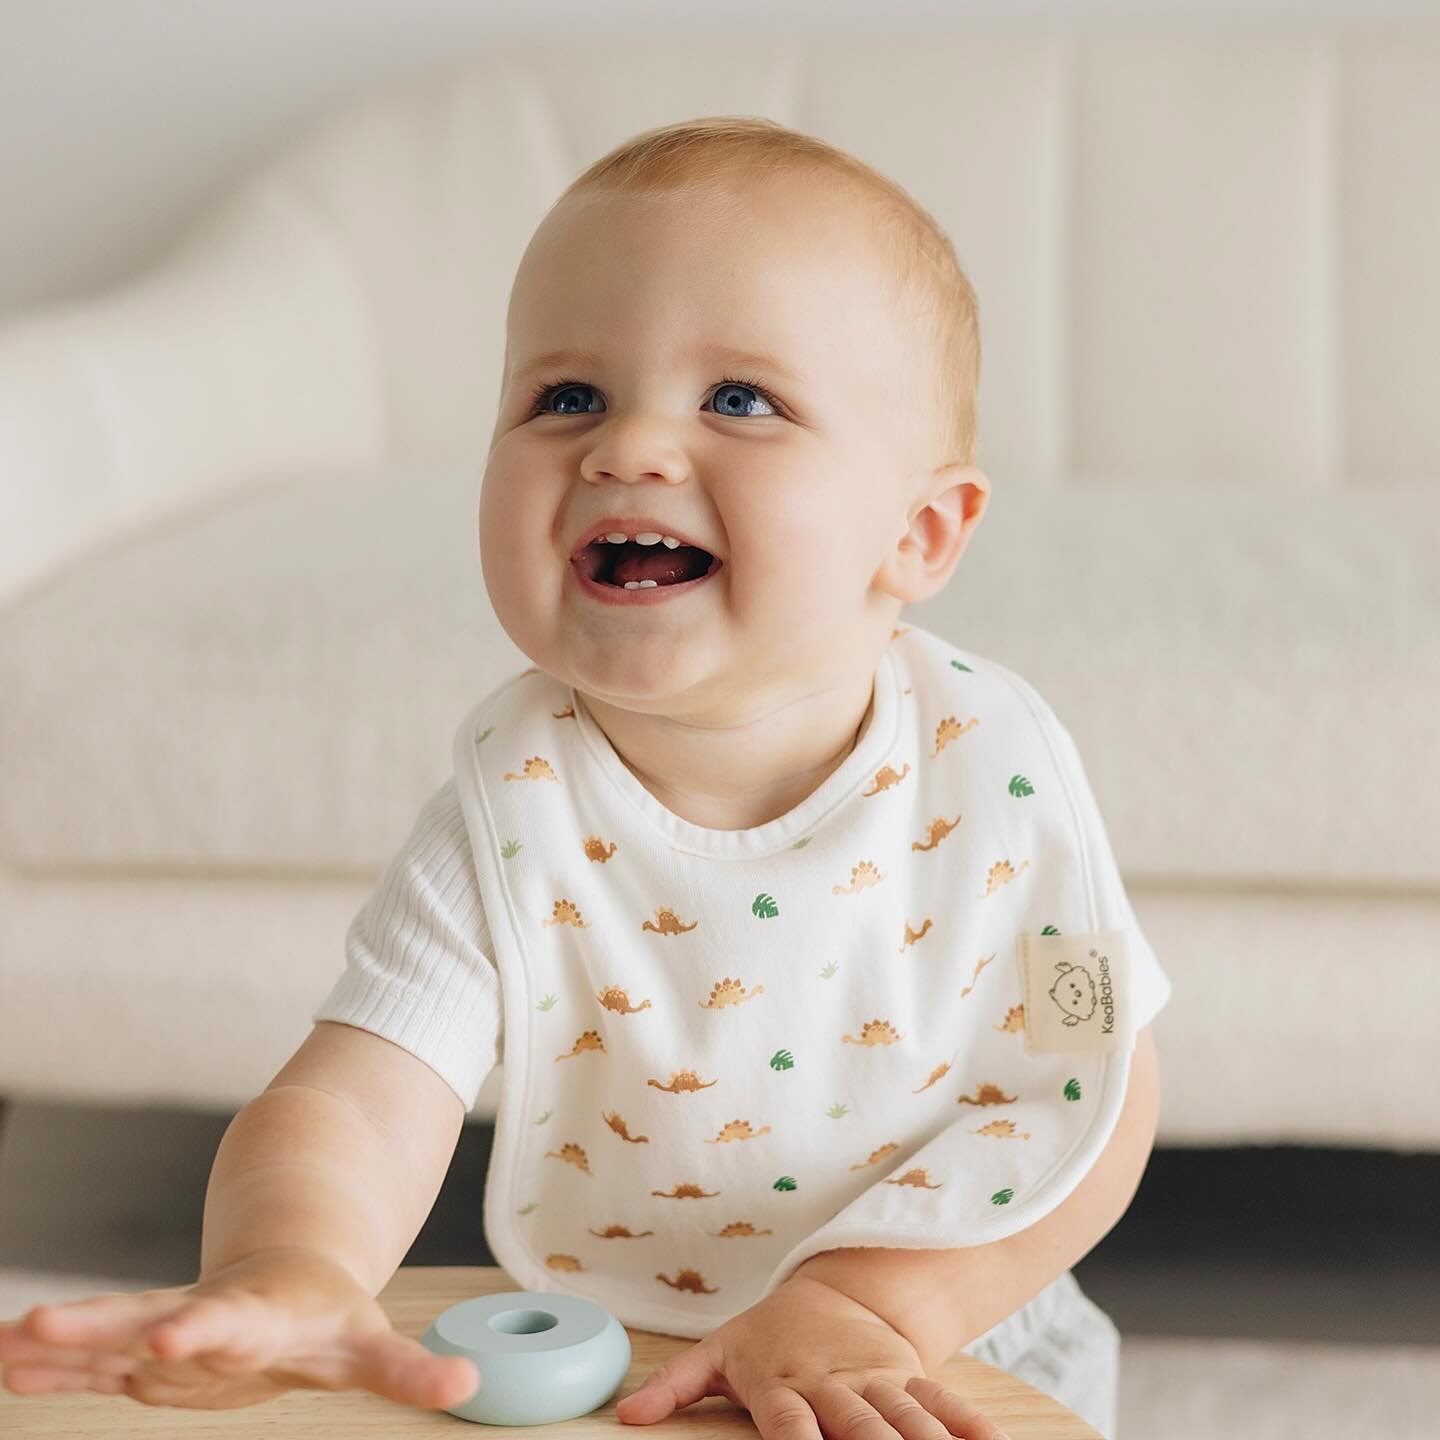 Such a cute lifestyle shoot for Coast Drool Bib product by @keababies 

Thank you to my models @thekelseymcgrath and @scvalerio 

If you&rsquo;re interested in having your child model for us, please submit your information and photos to my email katy